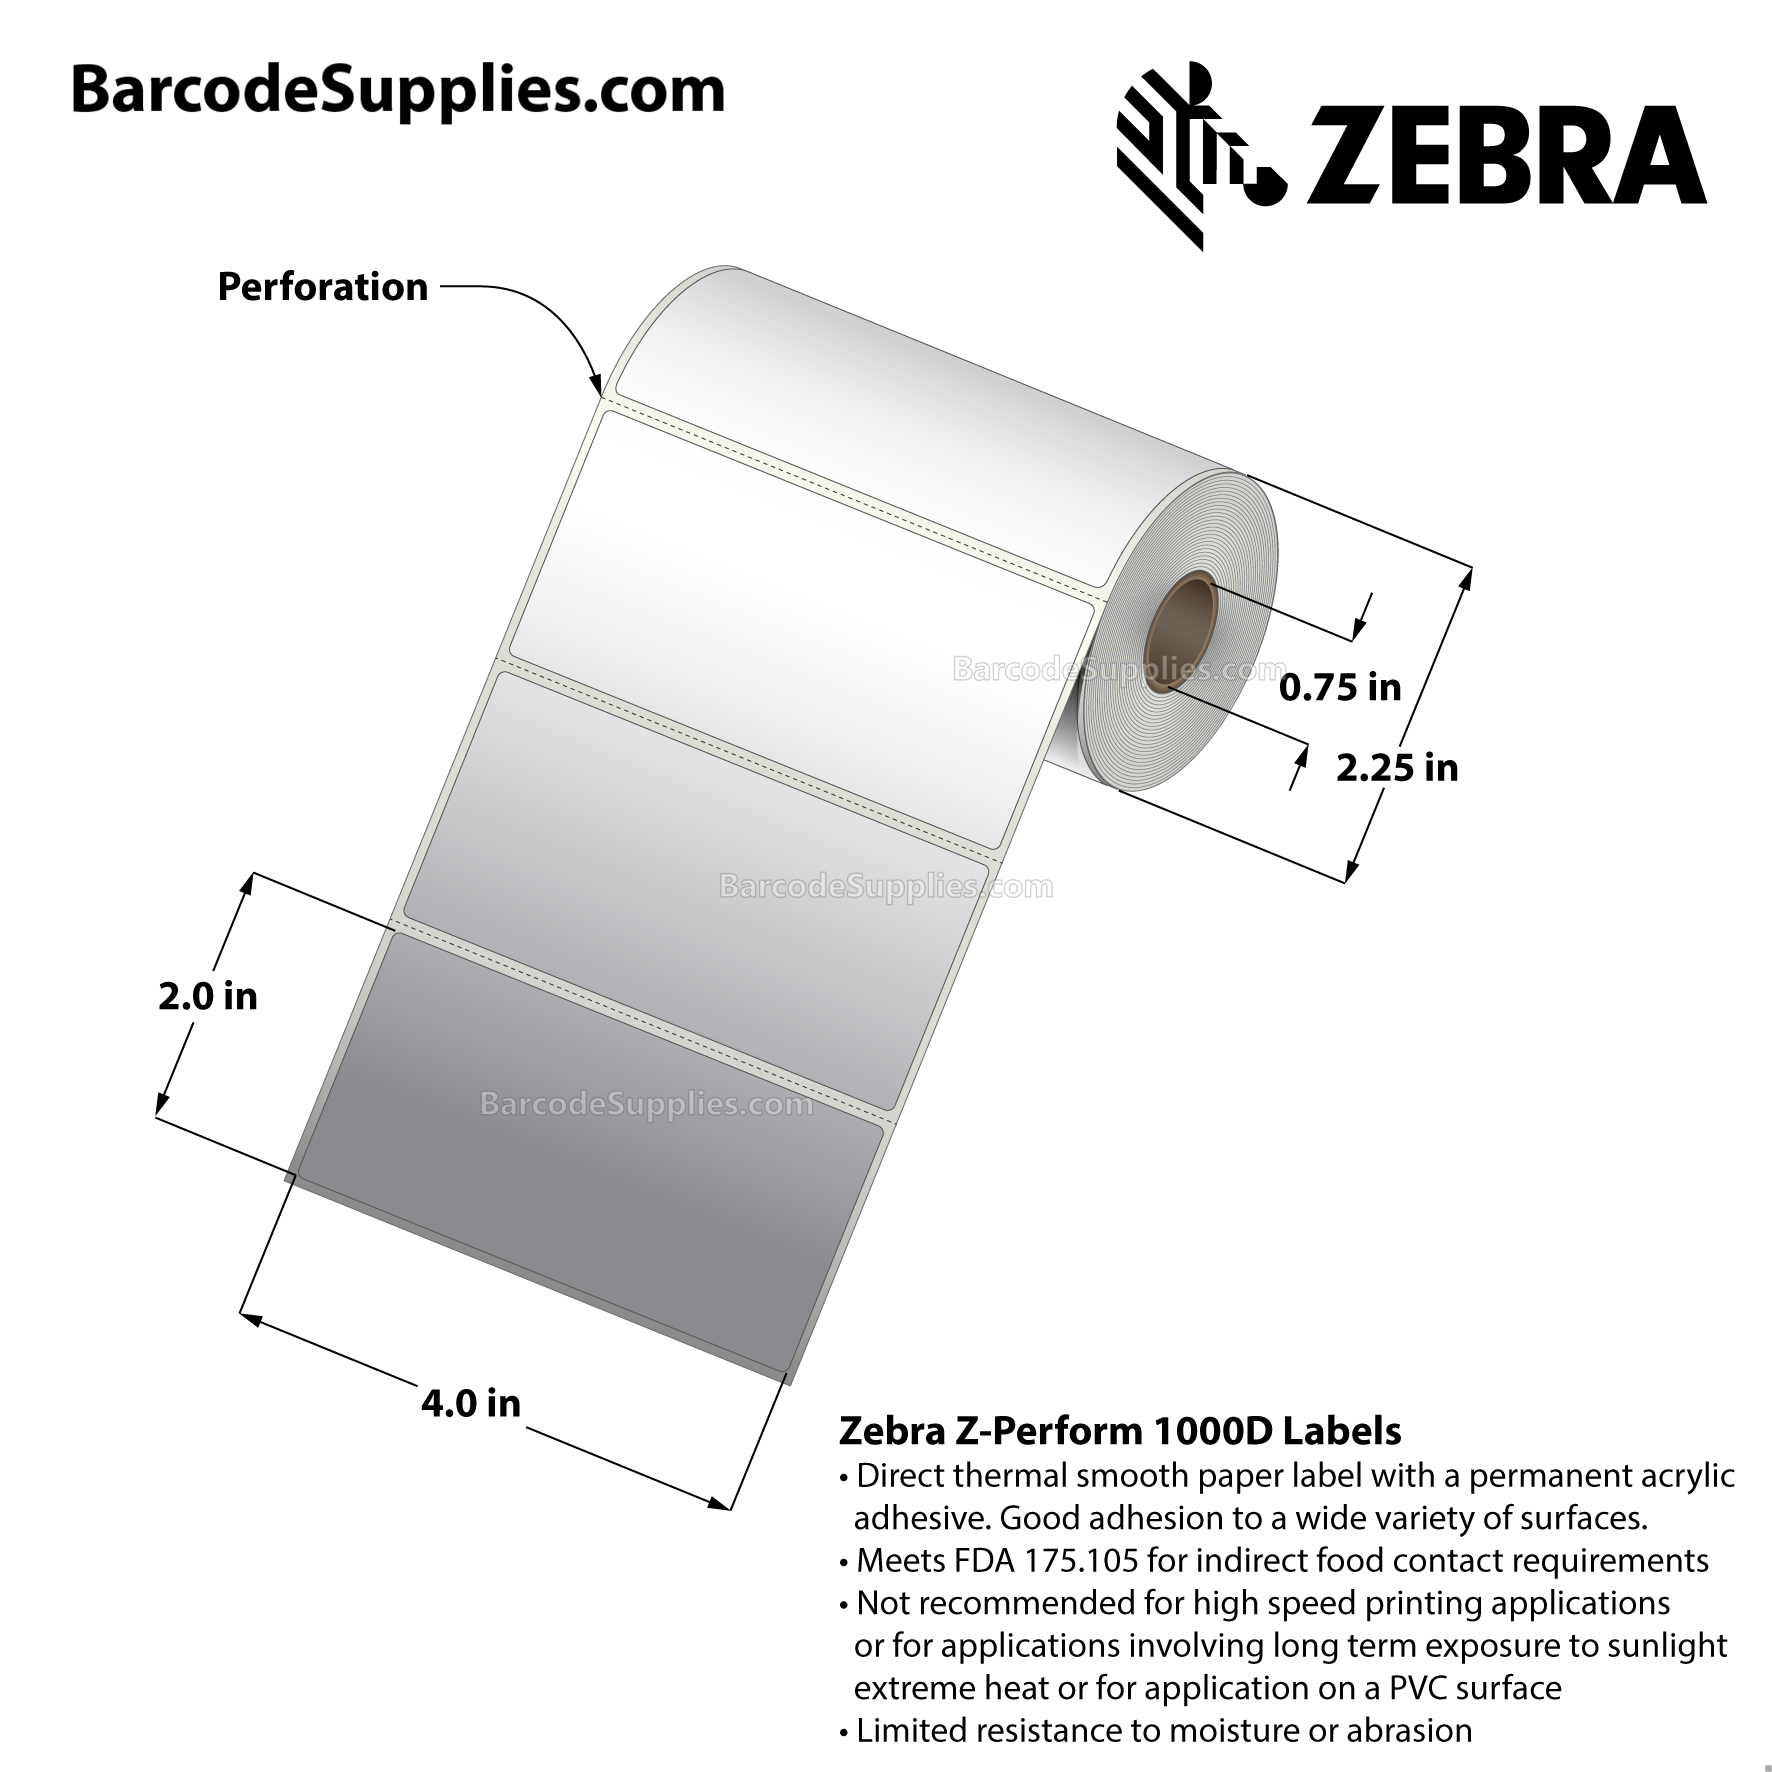 4 x 2 Direct Thermal White Z-Perform 1000D Labels With Permanent Adhesive - Perforated - 230 Labels Per Roll - Carton Of 36 Rolls - 8280 Labels Total - MPN: 10026372